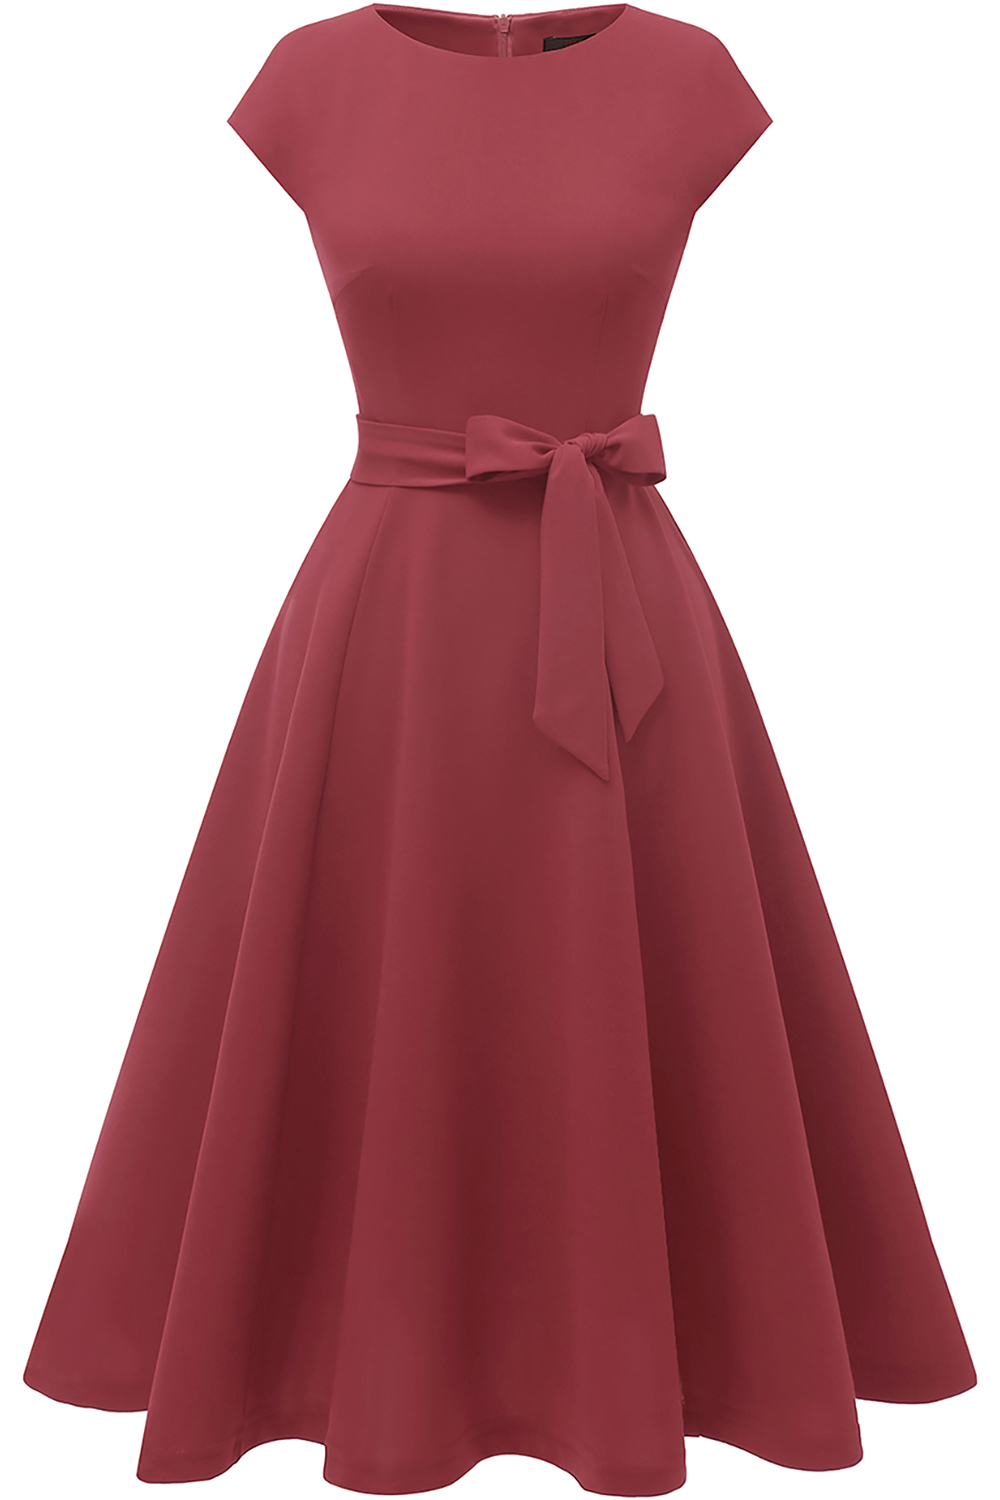 A-Line Knee-Length Raspberry Cocktail Dress with Cap Sleeves, Vintage Style, Unique and Elegant